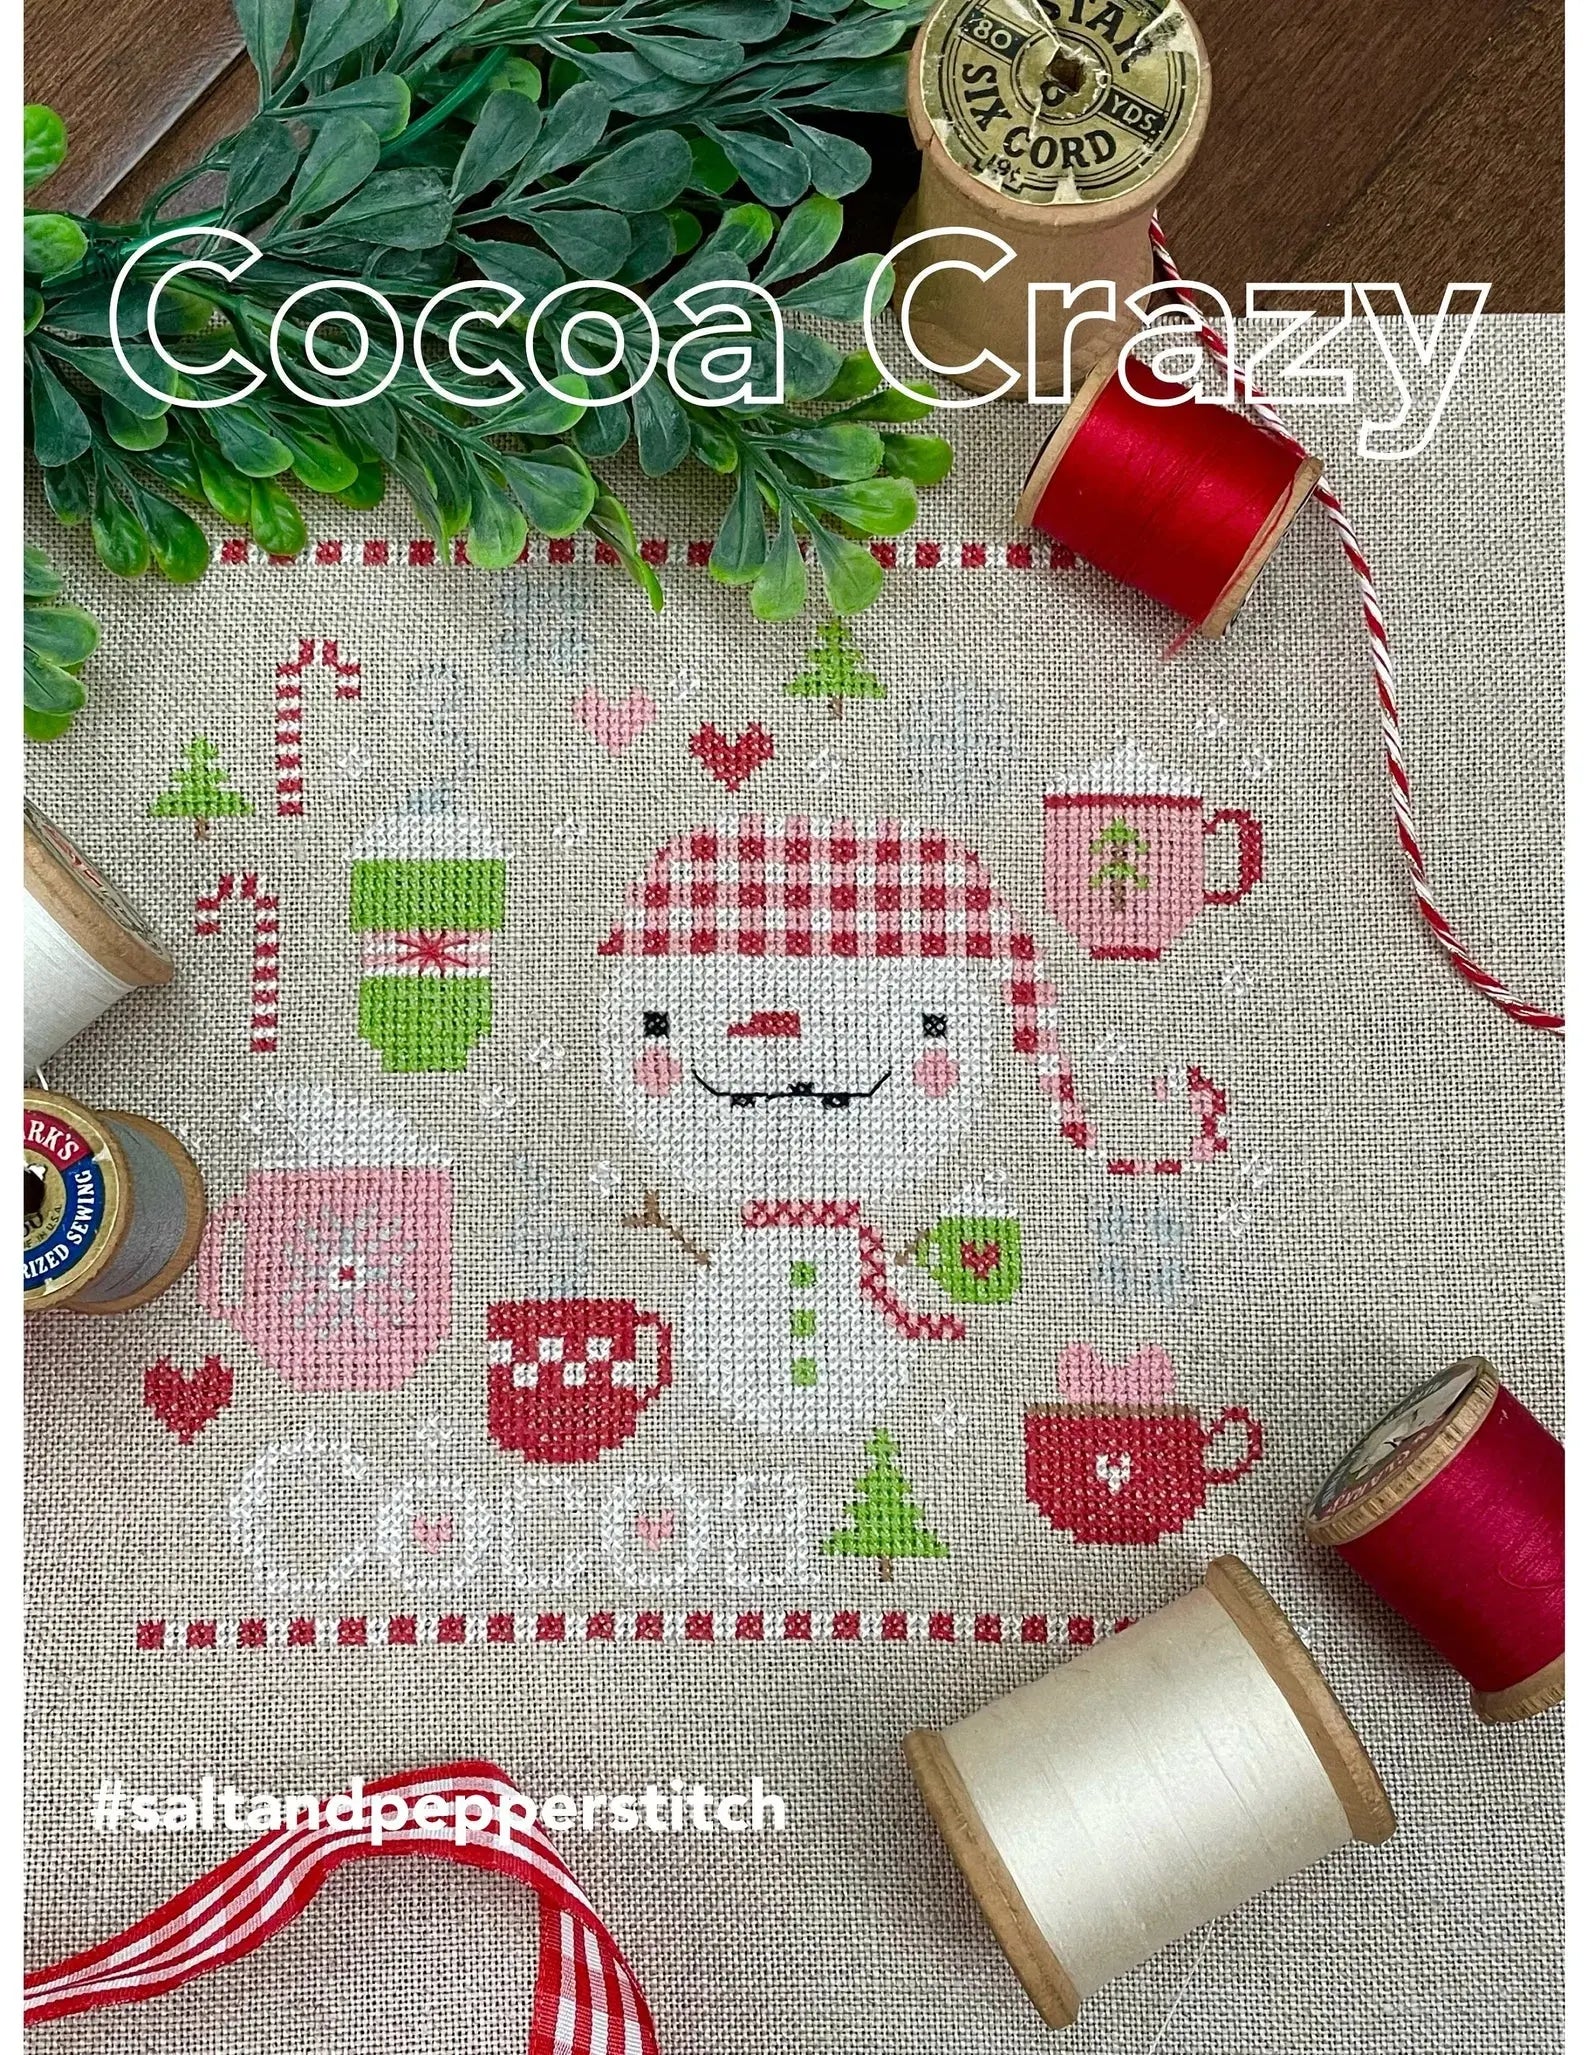 Cocoa Crazy by Emily Call Stitching Emily Call Stitching